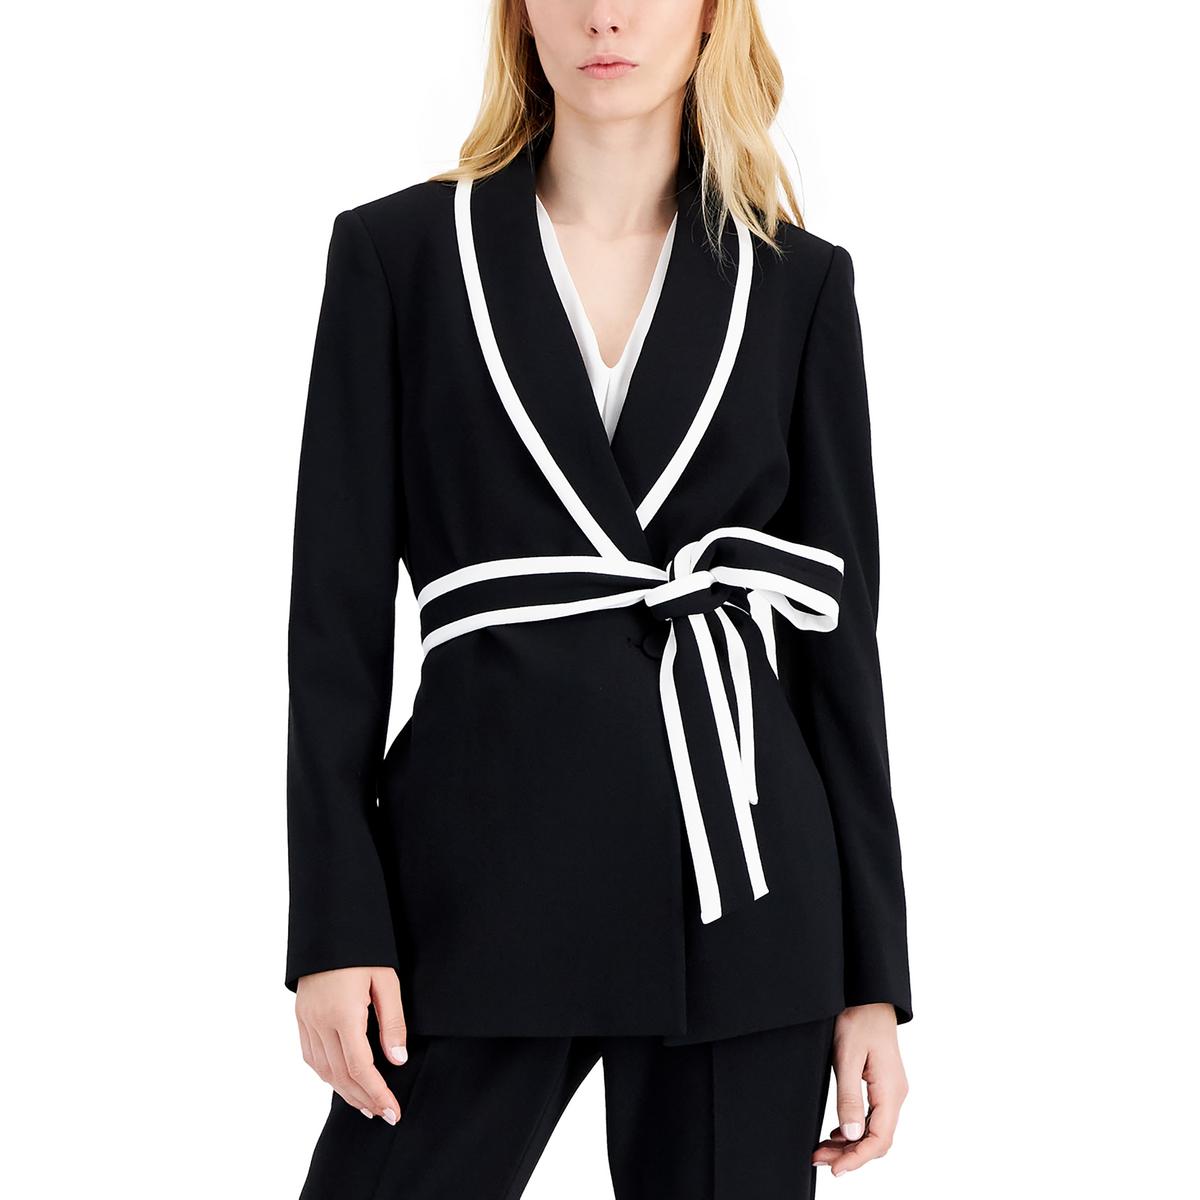 Tahari By ASL Womens Wrap Jacket and Dress Suit